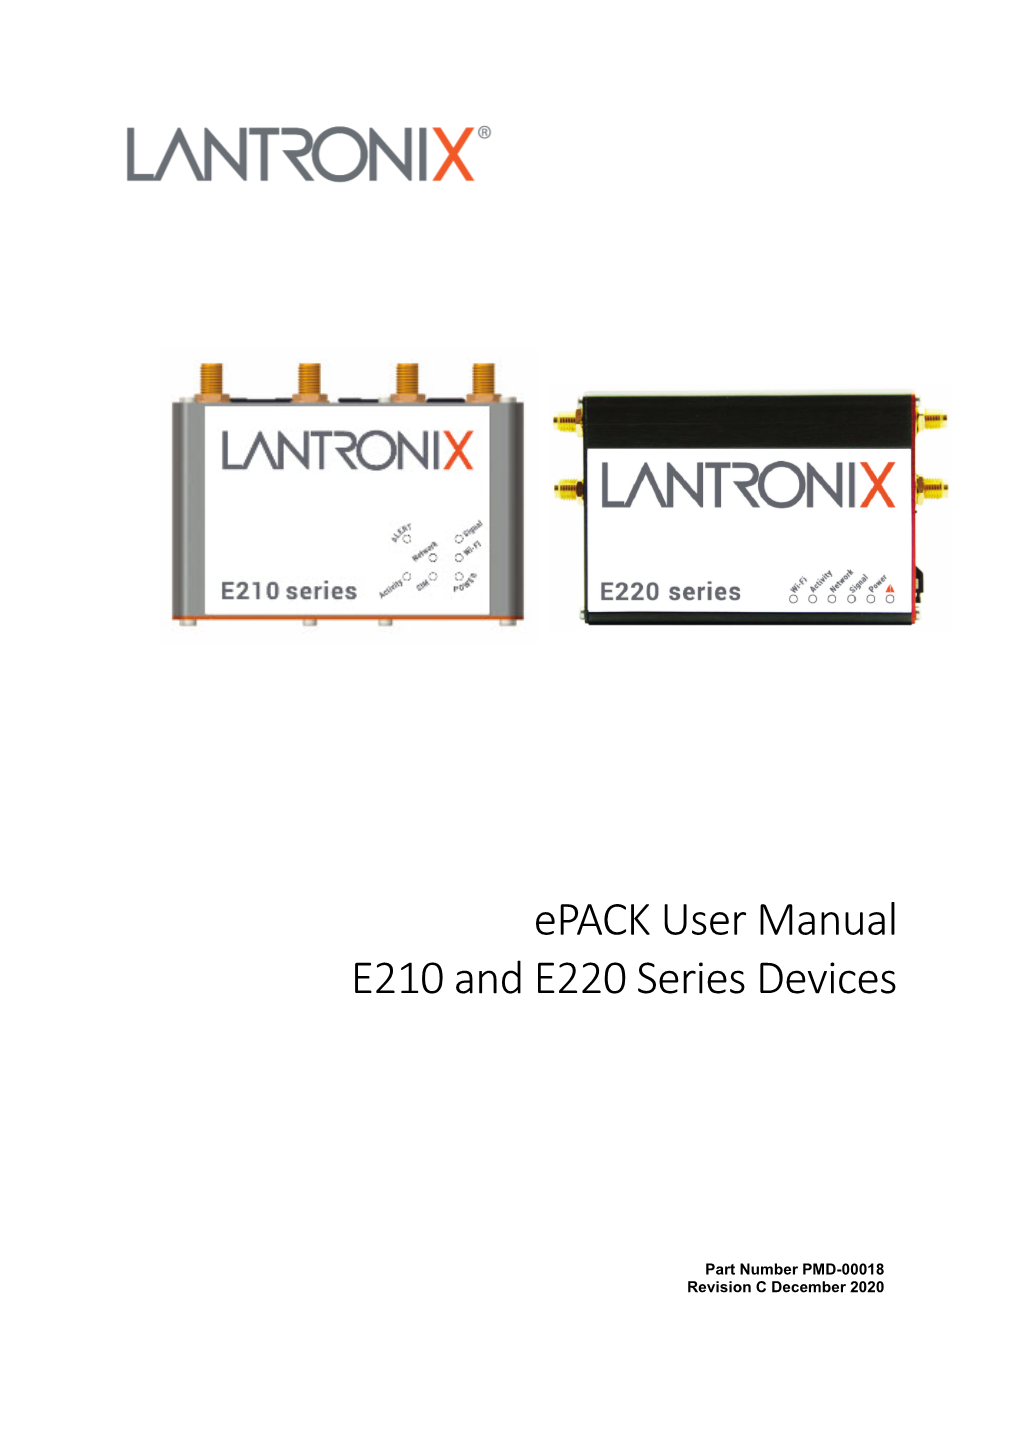 Lantronix Epack User Manual for E210 and E220 Series Devices